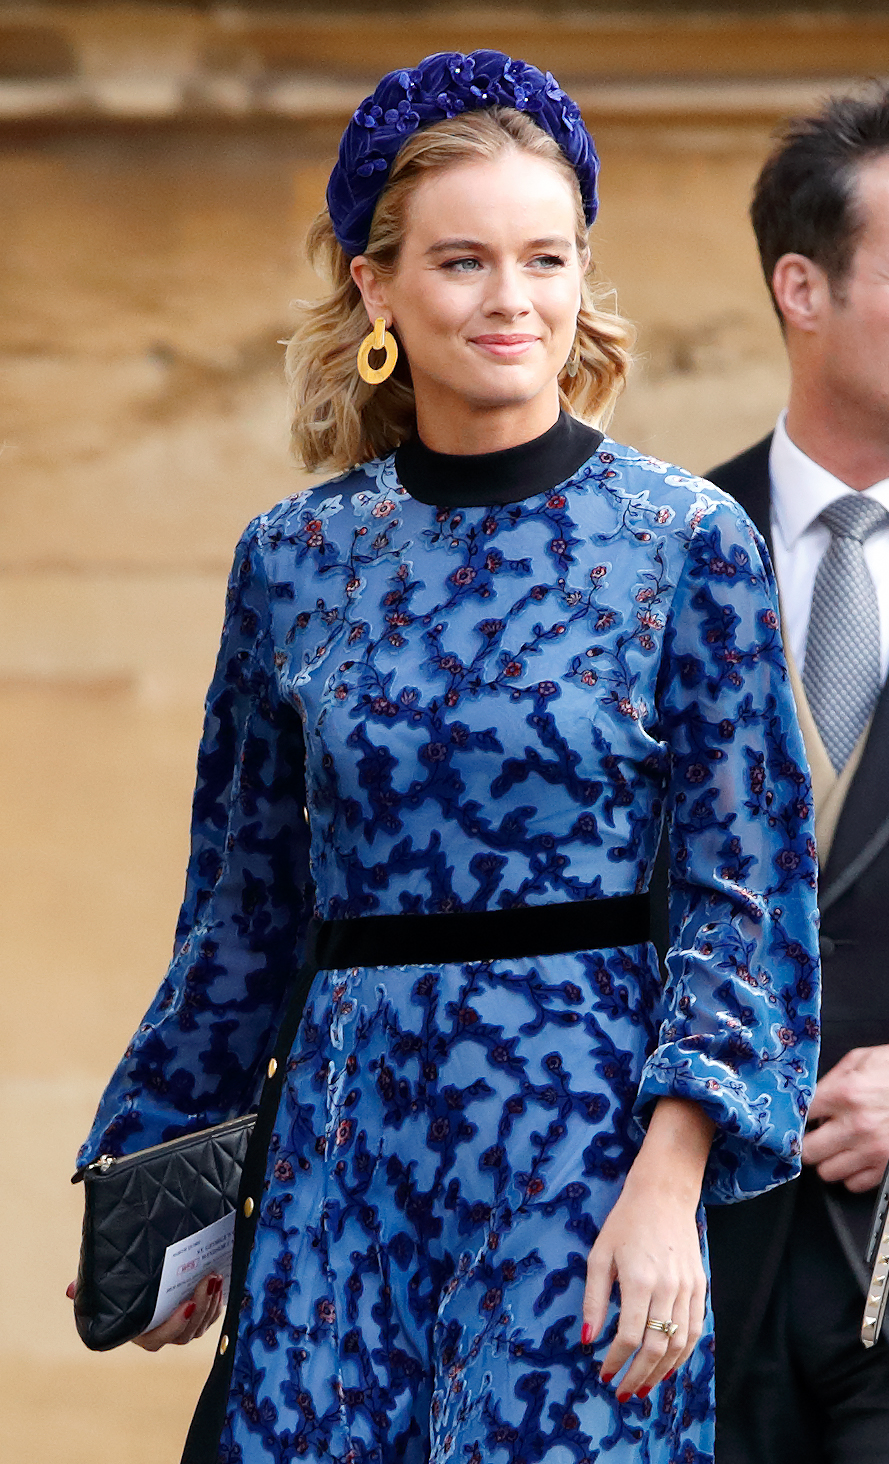 Cressida Bonas attends the wedding of Princess Eugenie and Jack Brooksbank at St George's Chapel on October 12, 2018 in Windsor, England. | Source: Getty Images